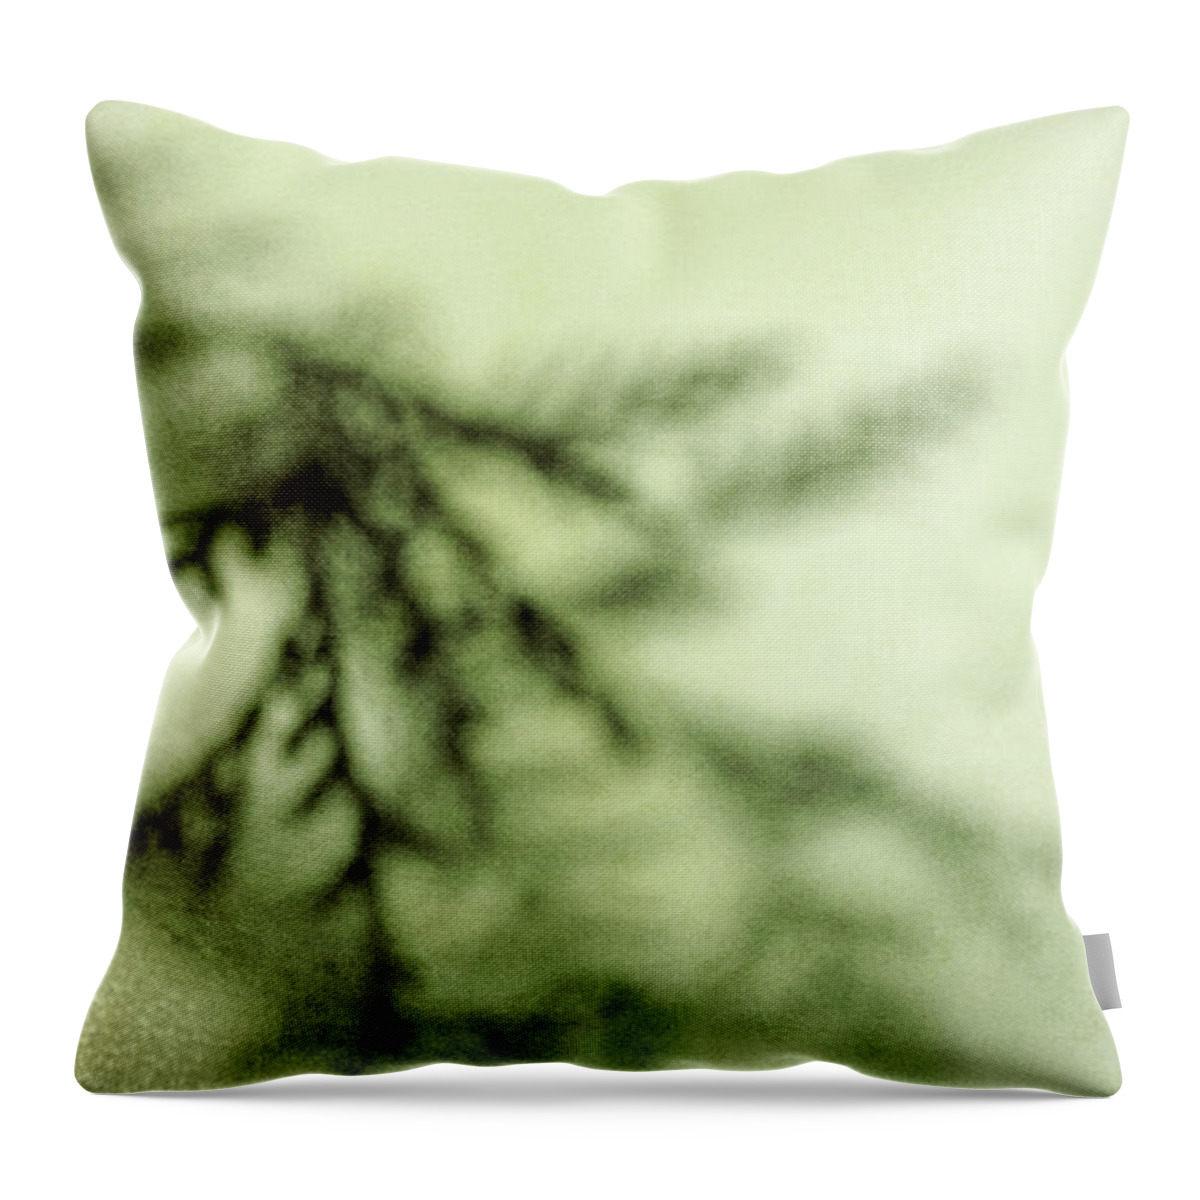 Tree Throw Pillow featuring the photograph Evergreen by Margie Hurwich